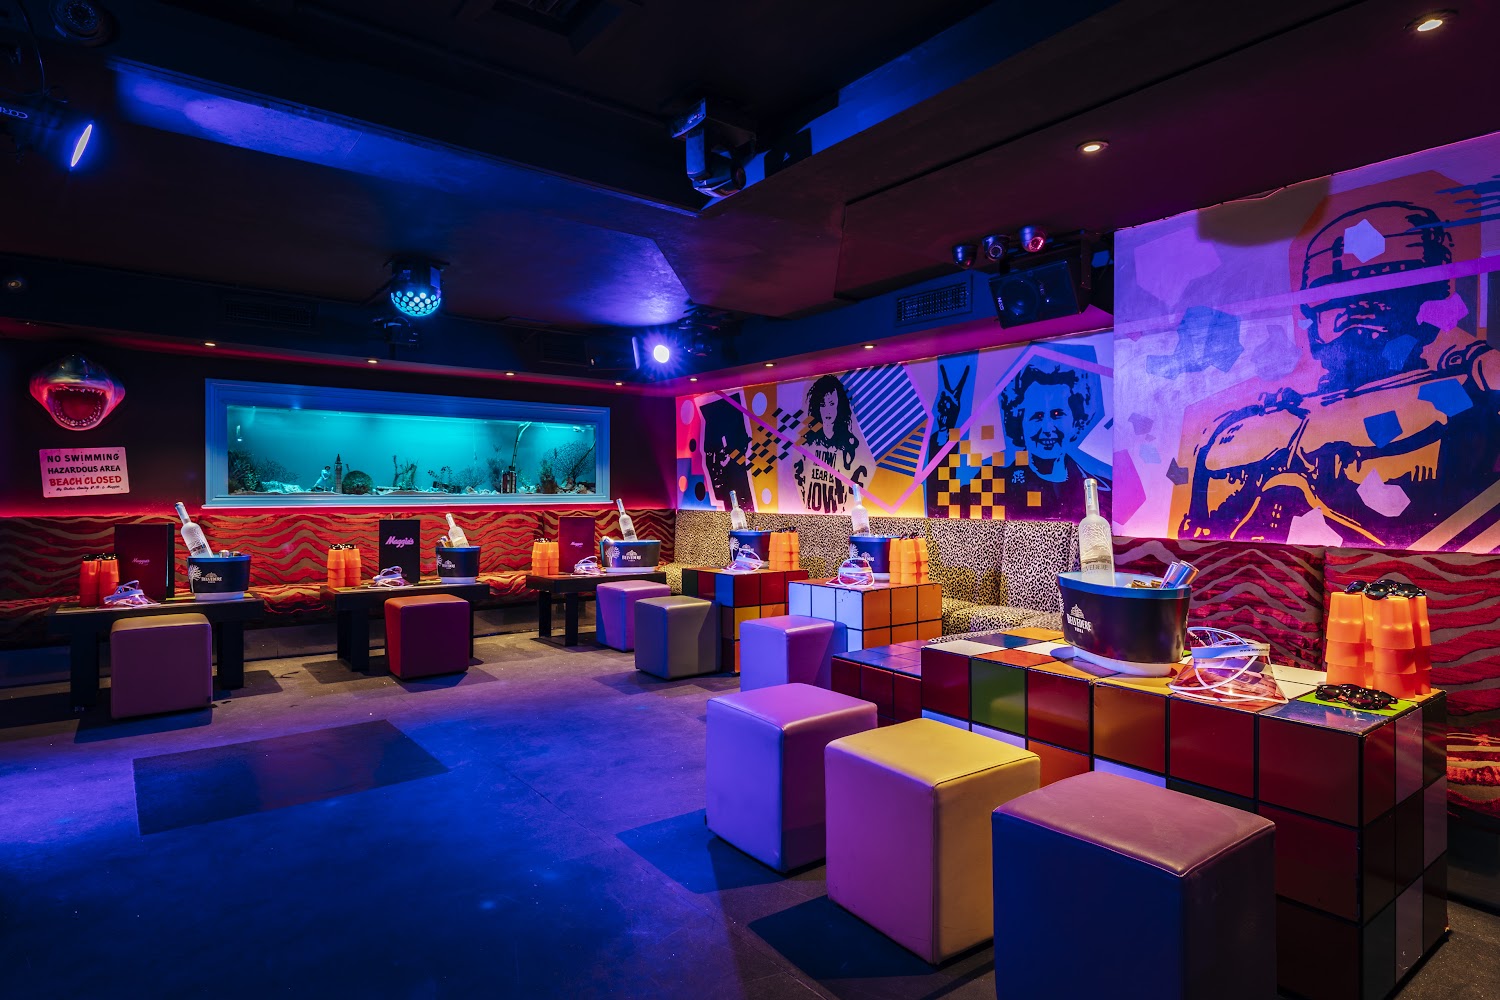 1980's theme interior of maggie's club, including rubix cube table, giant 80s fish tank and retro lighting system